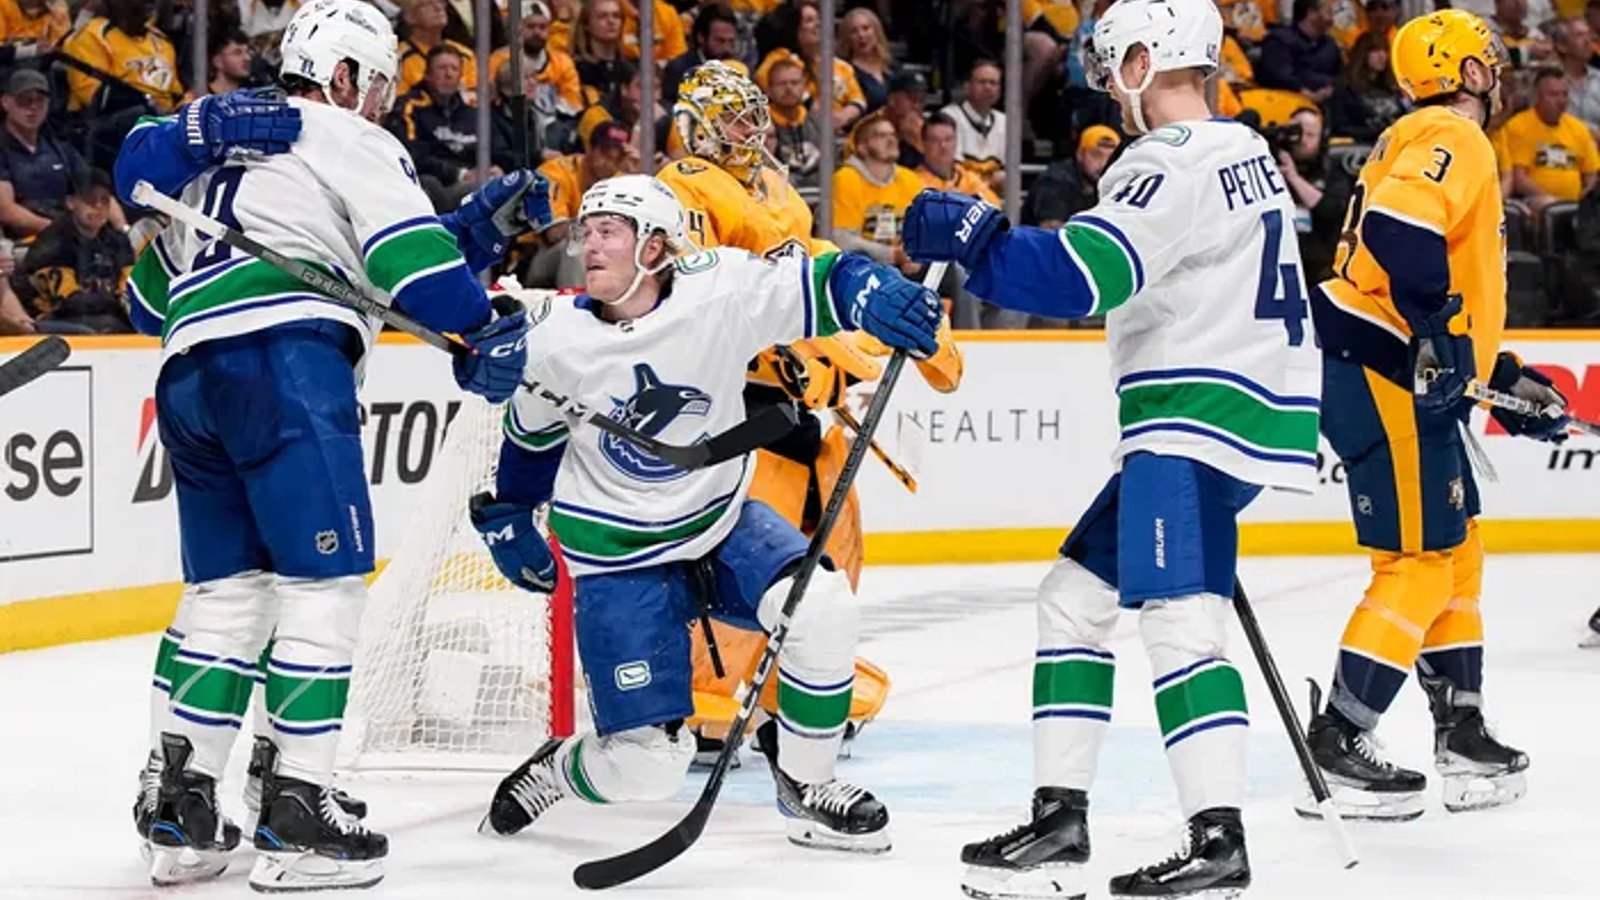 Canucks set stunning franchise record in Game 3 win!